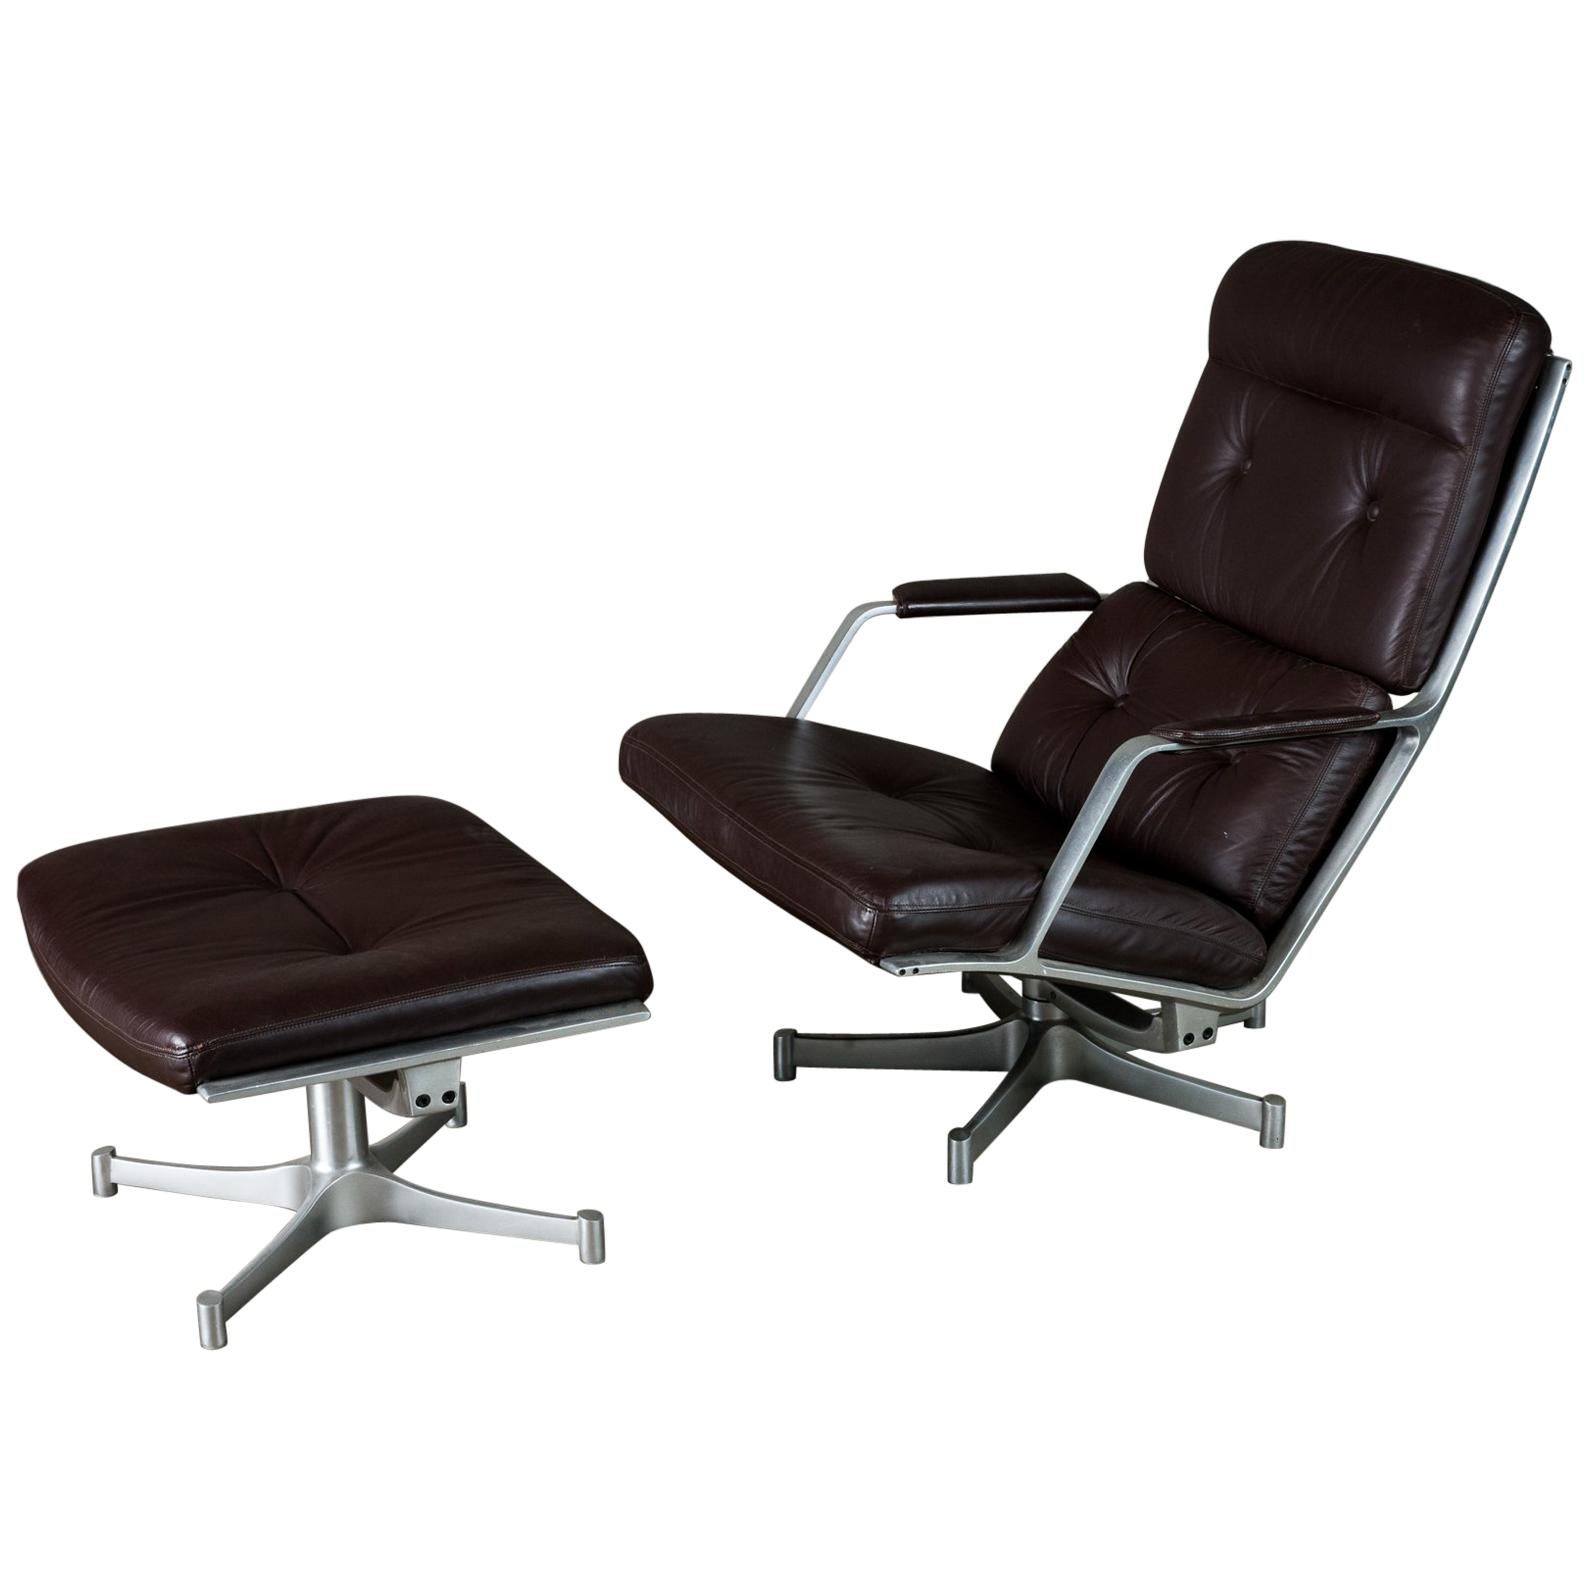 Fabricius & Kastholm Lounge Chair with Ottoman